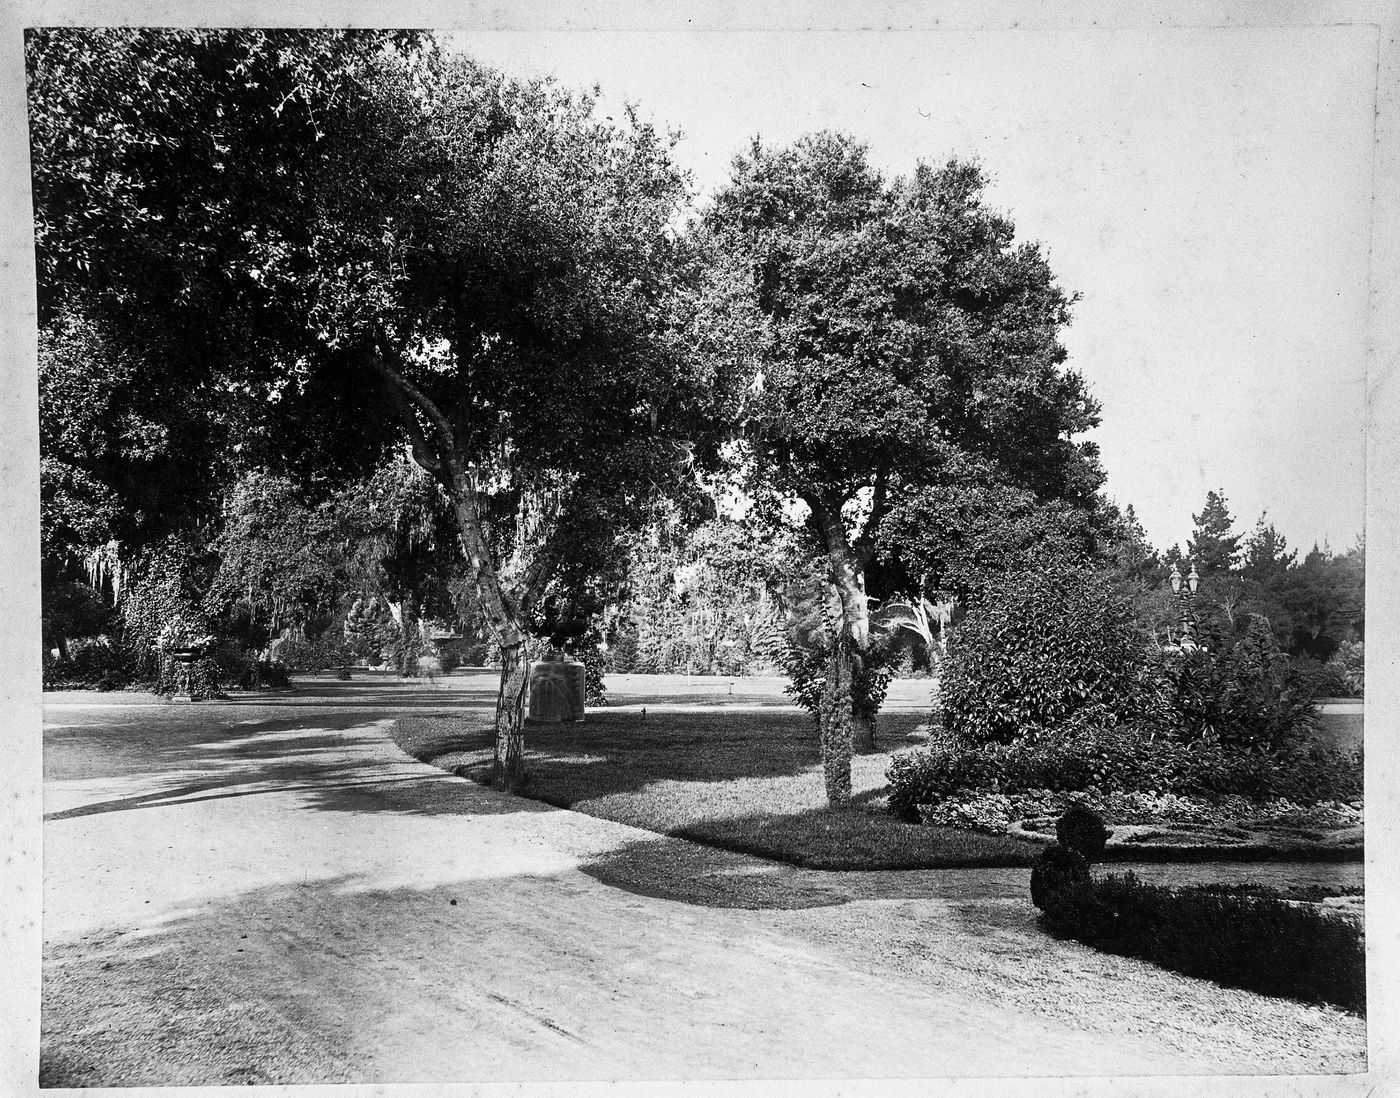 View of lawn and curve of driveway, Linden Towers, James Clair Flood Estate, Atherton, California